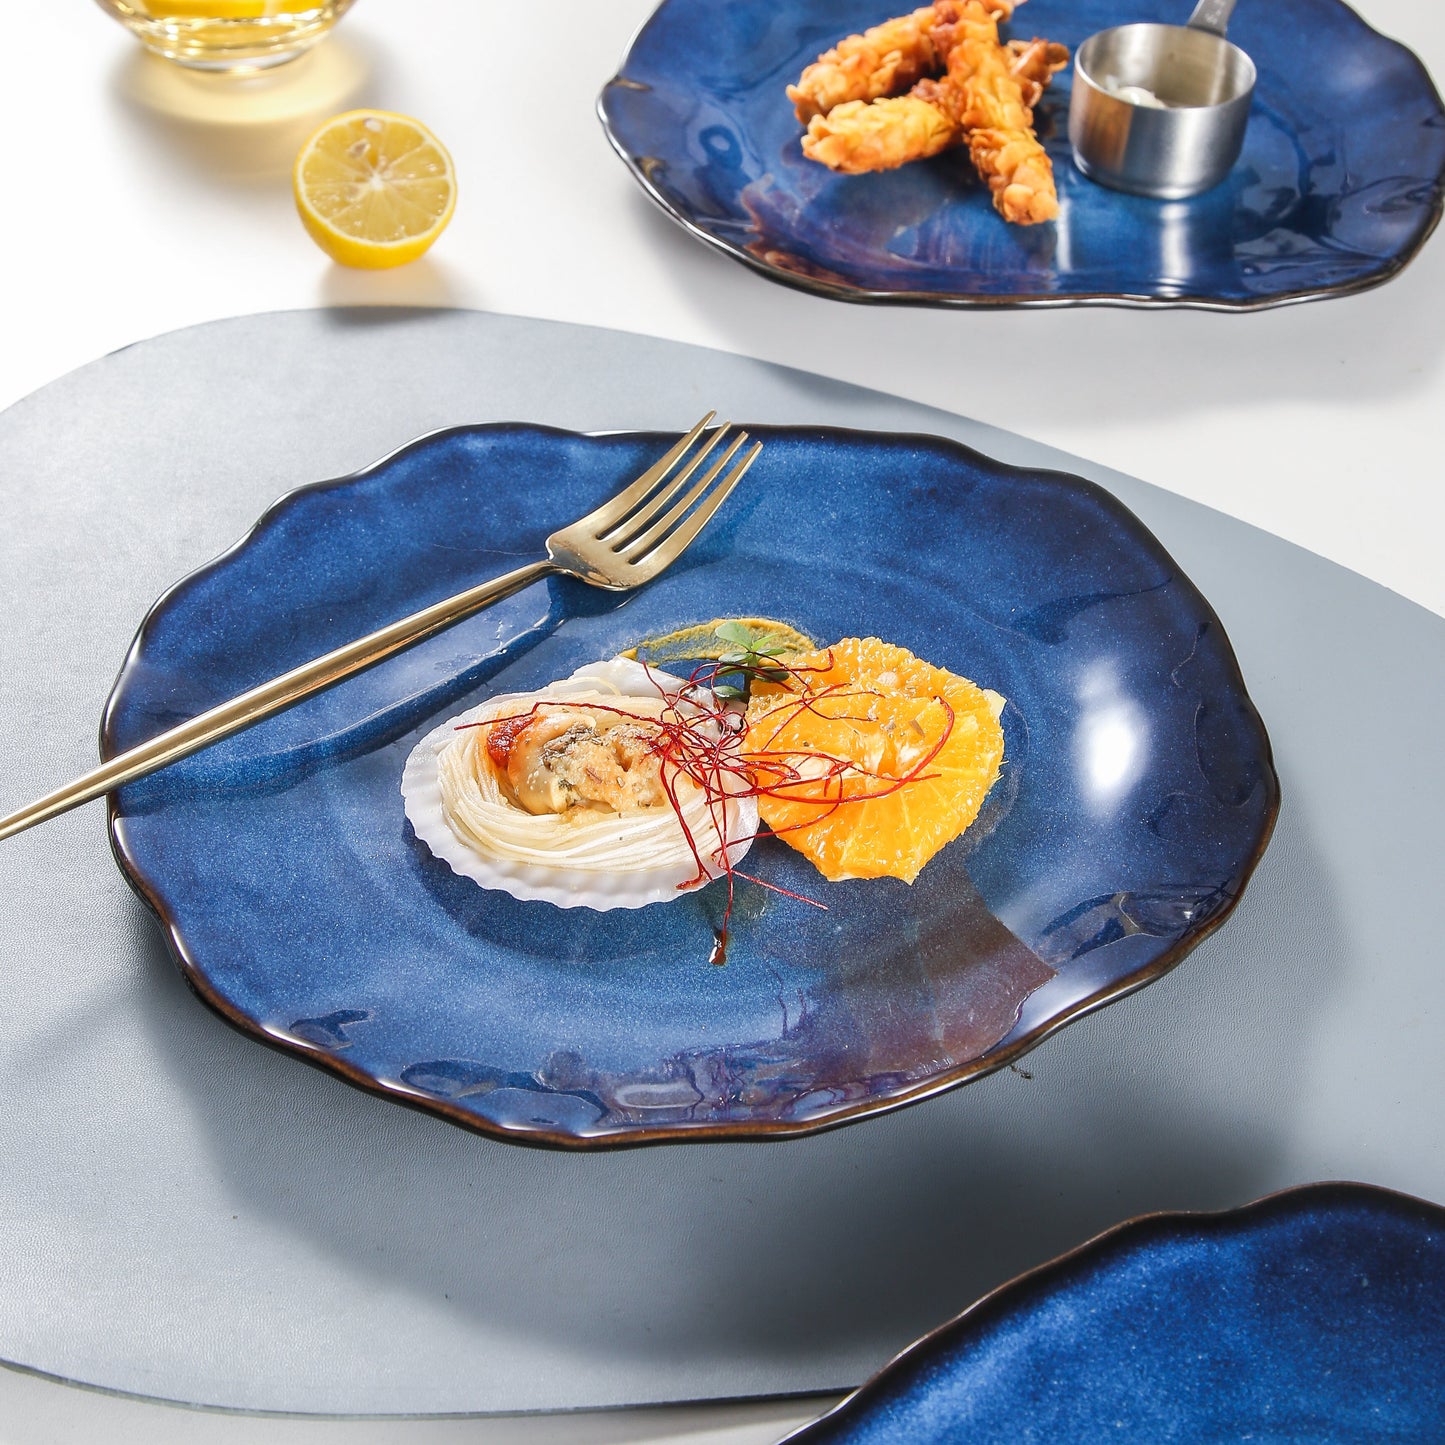 Decosignature Blue Elegance: 6-Piece 10.25 Inch Dinner Plate Set for Sophisticated Dining